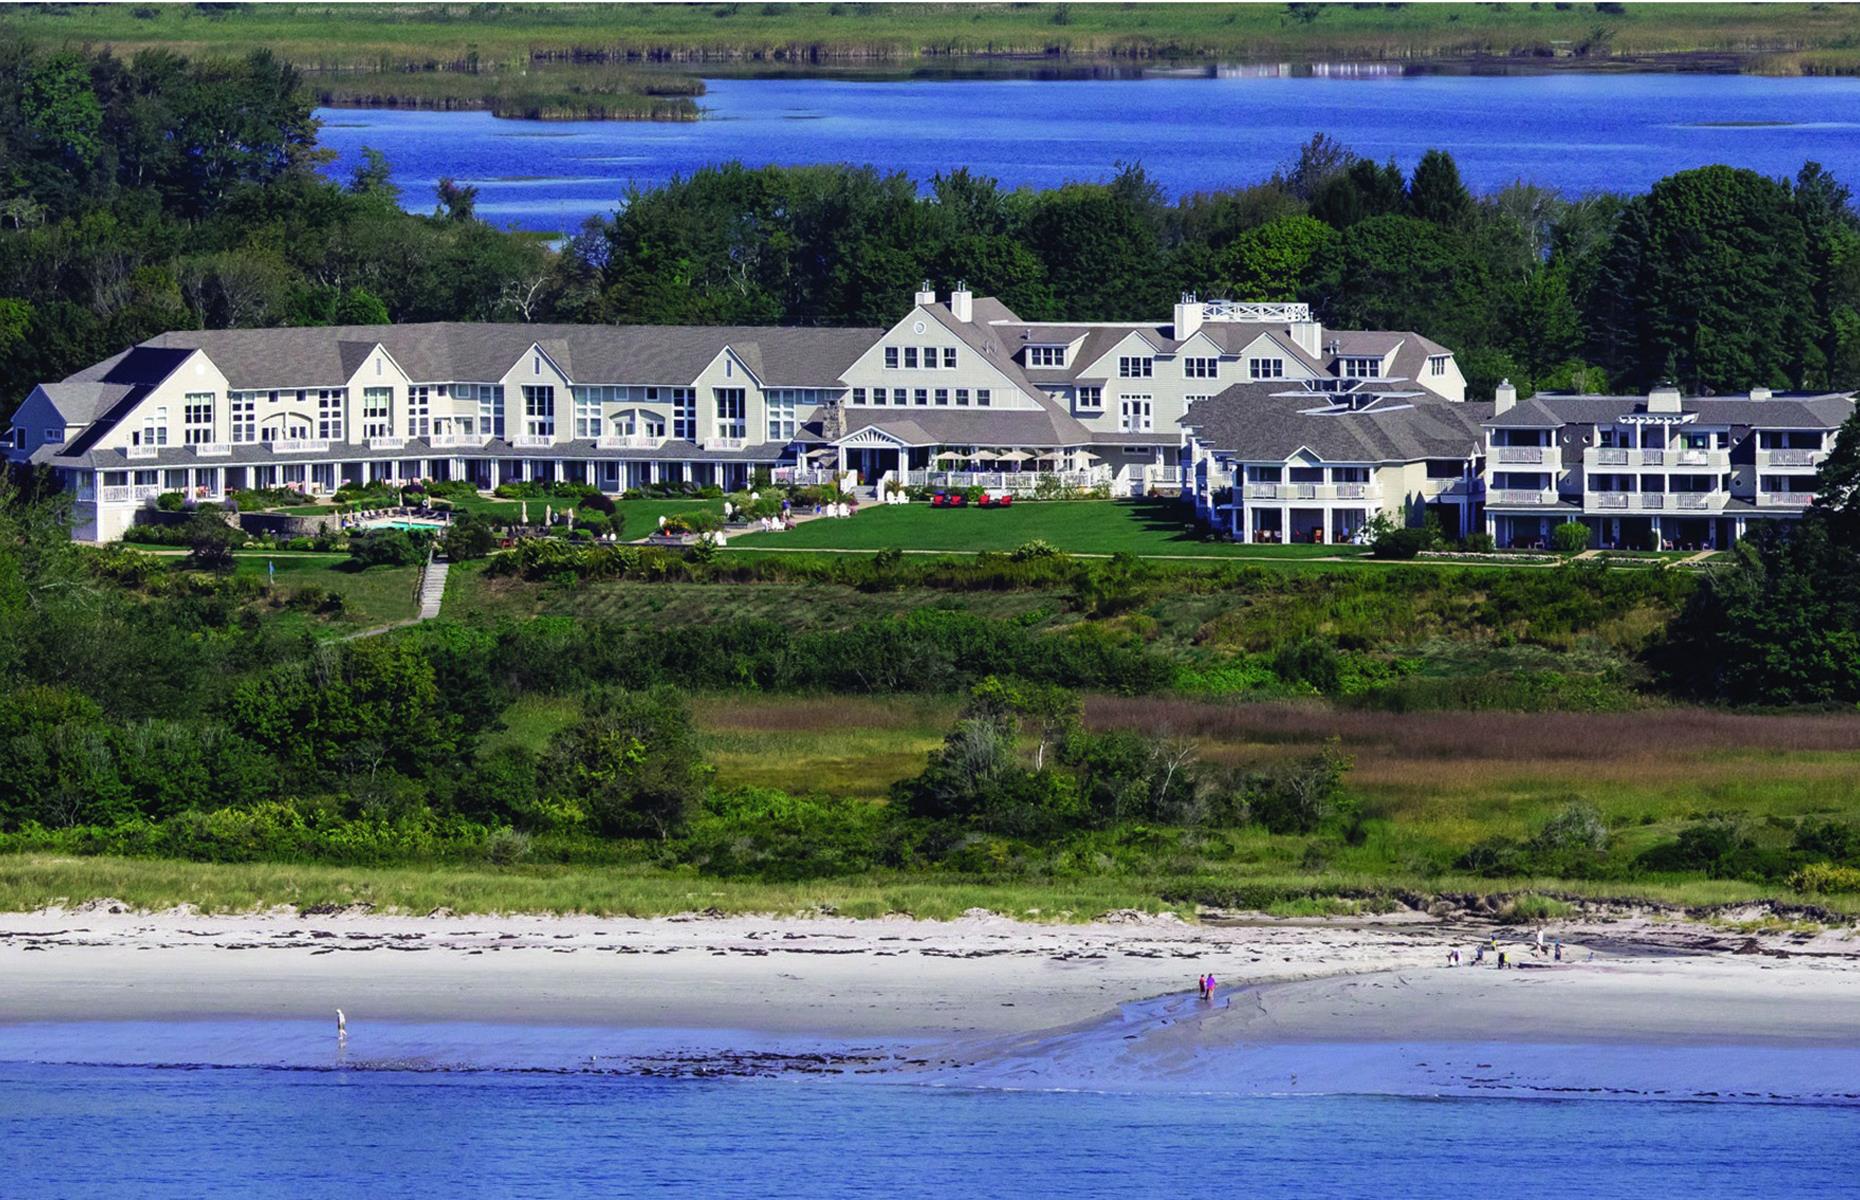 <p>Sweeping sea views and spectacular seafood make <a href="http://seaglassmaine.com">this Cape Elizabeth restaurant</a> a glorious spot for a sundowner or special dinner. Chef Chadwick has designed <a href="https://www.yelp.com/biz/sea-glass-cape-elizabeth">a superb menu</a>, with flavorful risottos, fresh grilled fish, succulent lobster and local mussels. There's Champagne and prosecco, as well as craft cocktails and a seasonally changing menu for the dogs too. Sit outside on the terrace for the best panoramas of the ocean.</p>